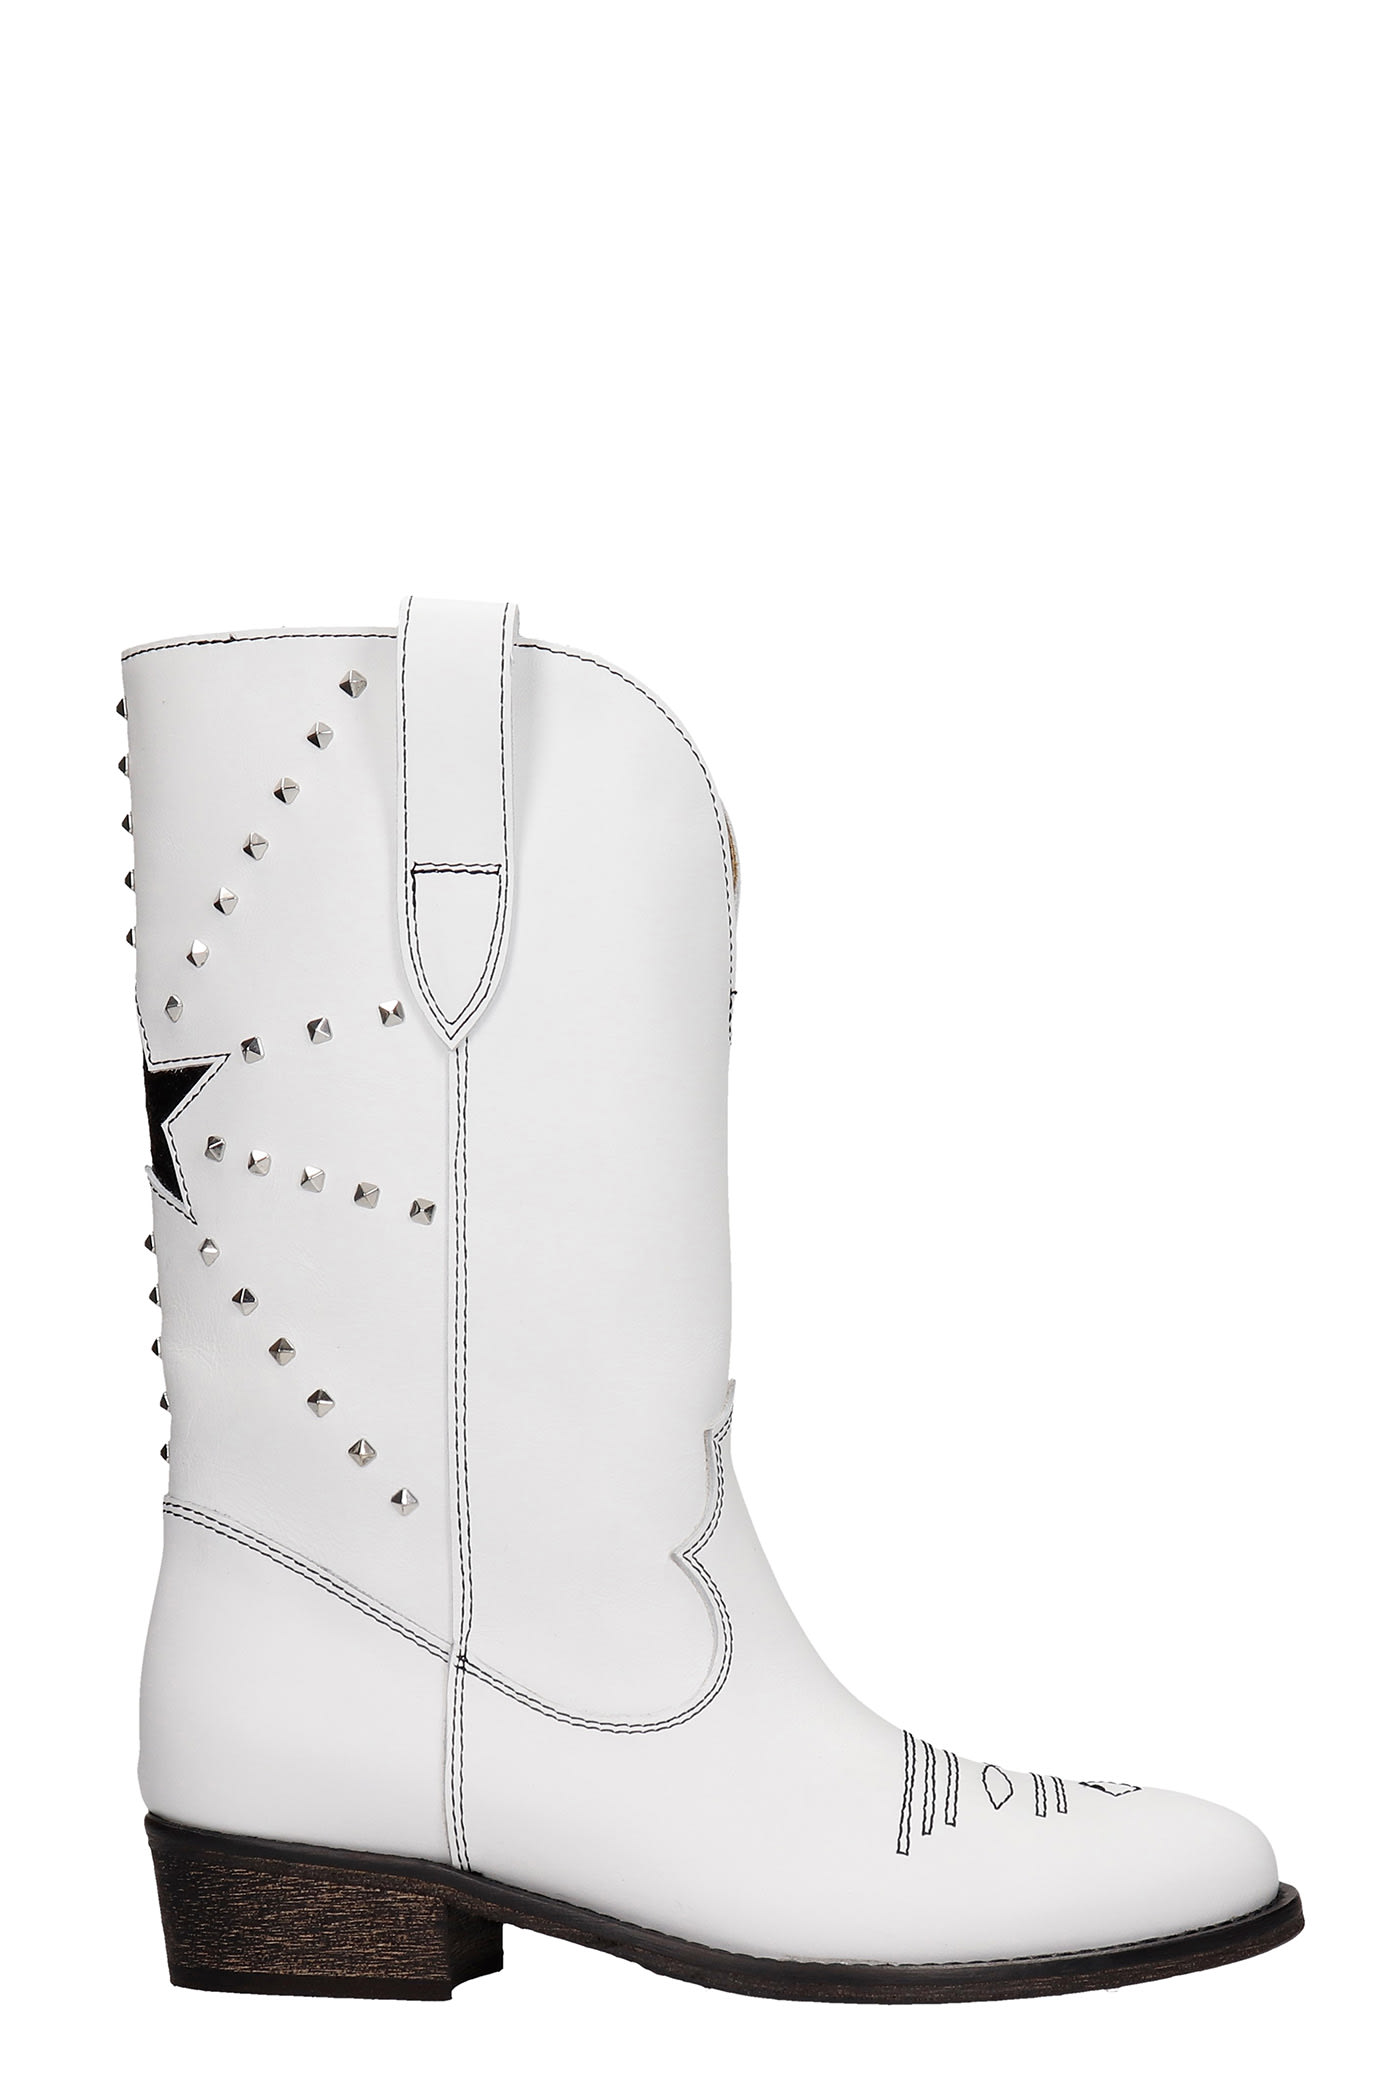 Via Roma 15 Texan Boots In White Leather